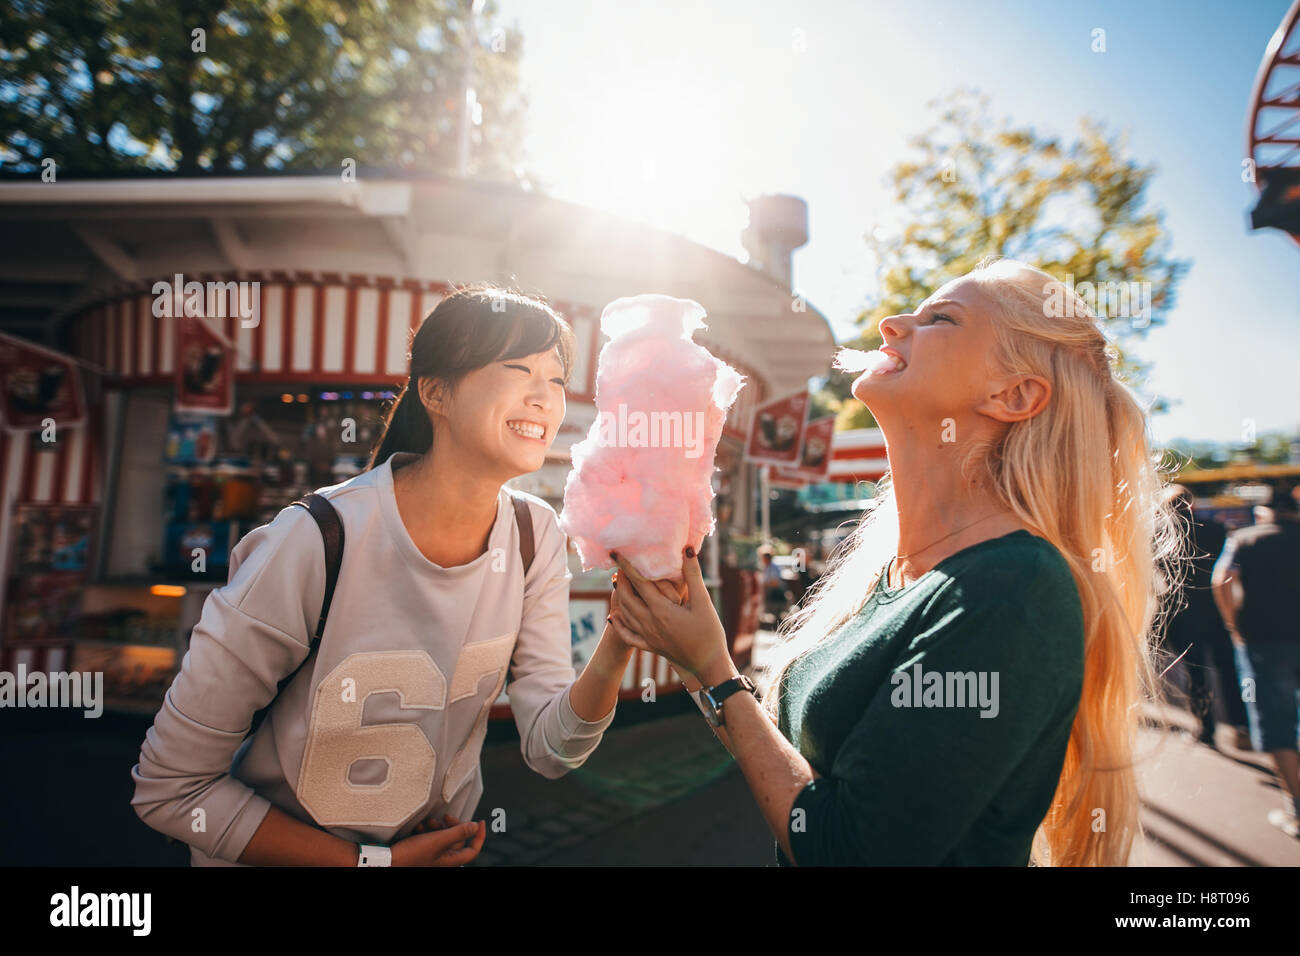 Shot of happy female friends in amusement park eating cotton candy. Two young women enjoying a day at amusement park. Stock Photo